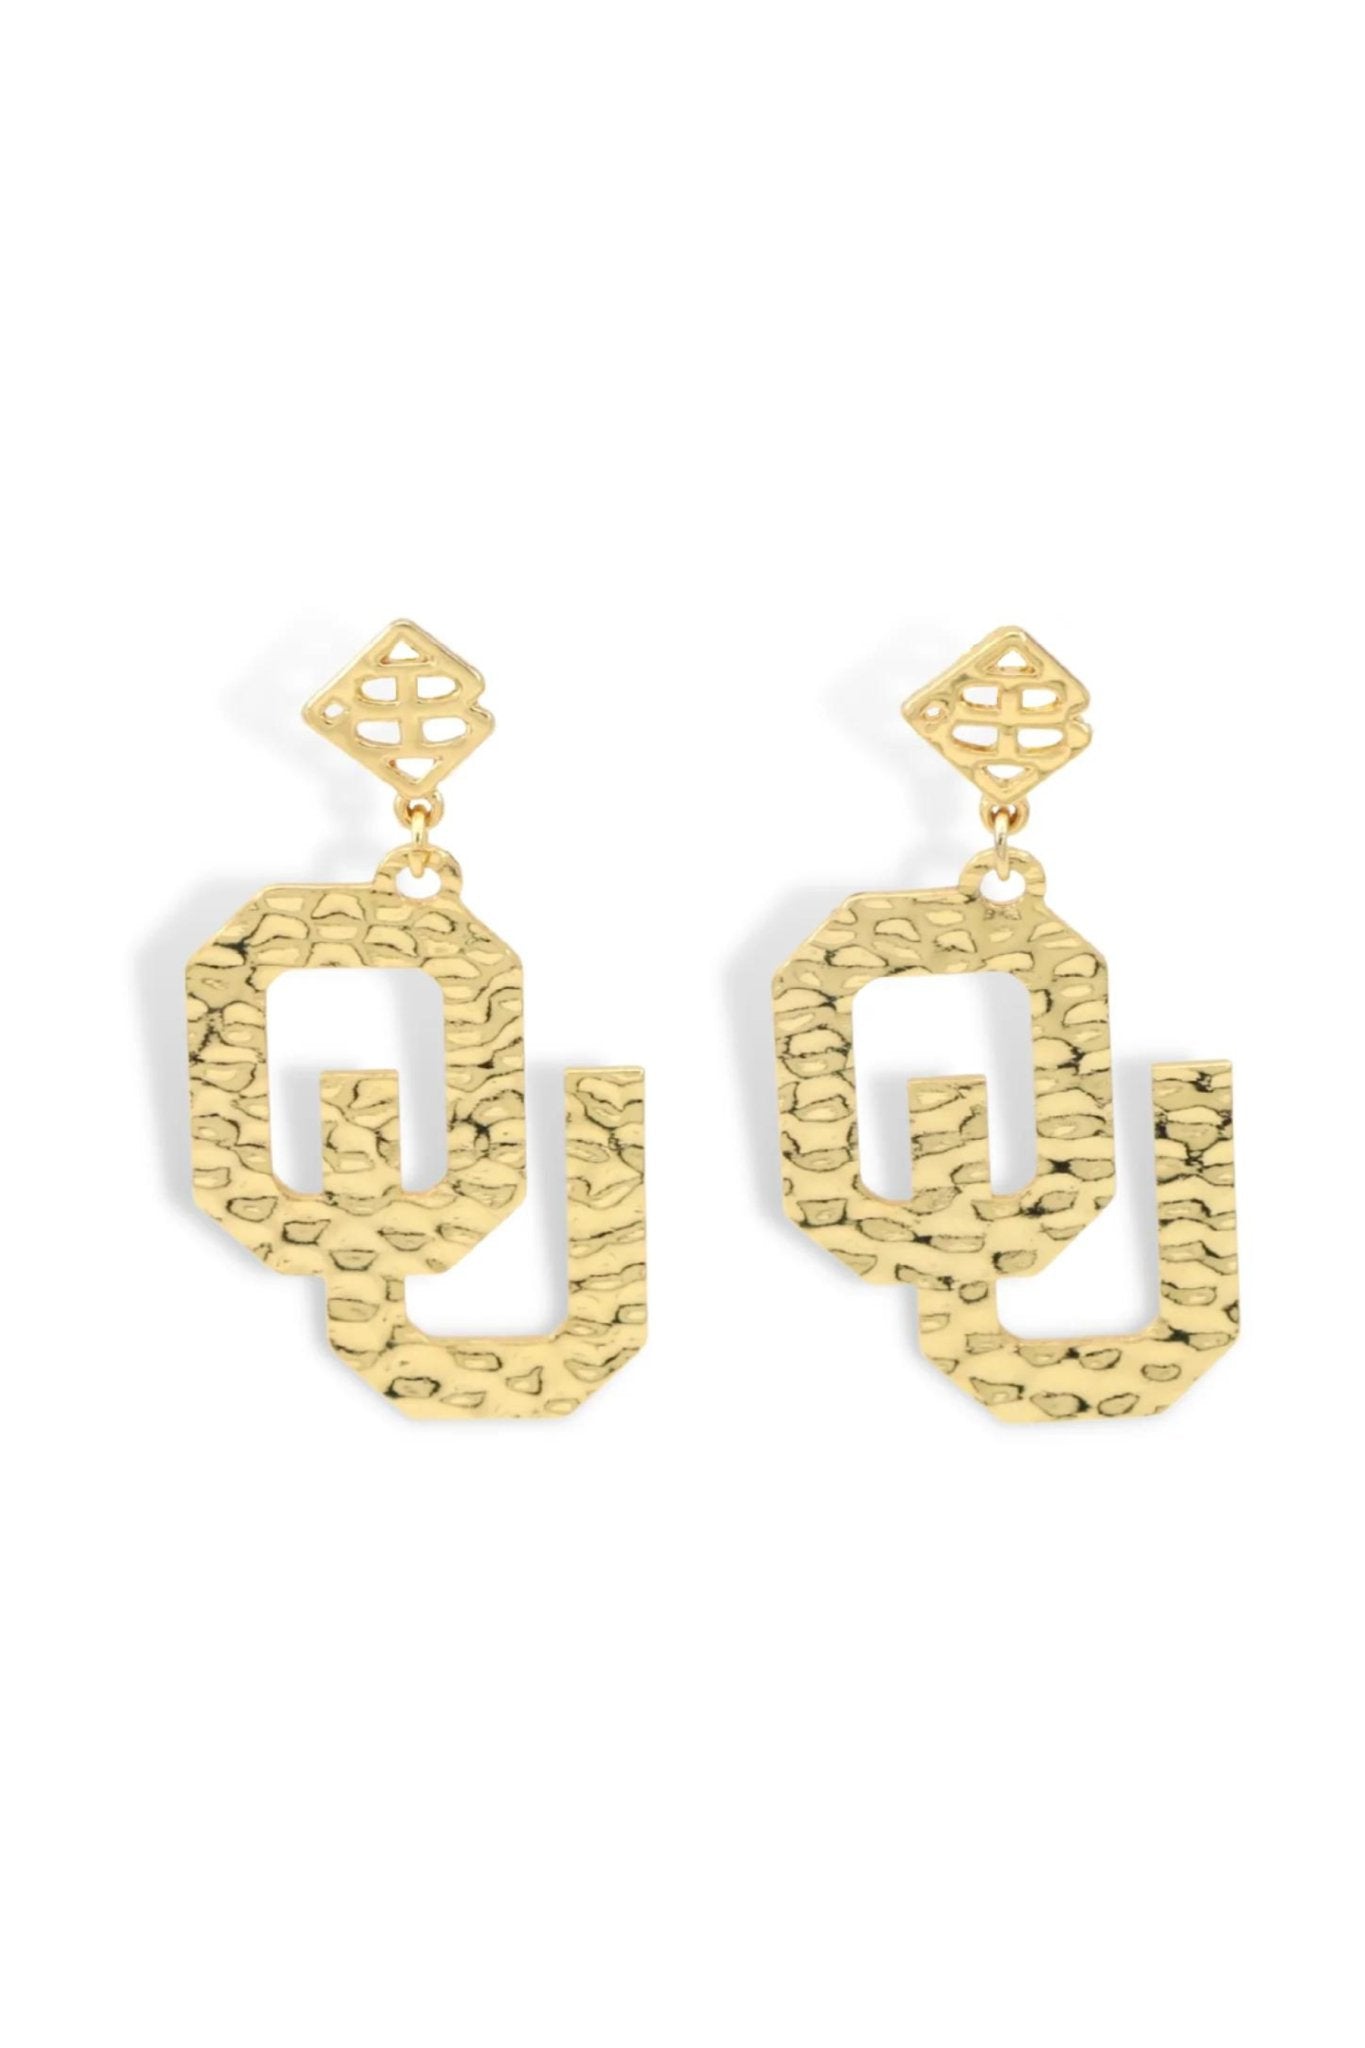 Gold OU Logo Earrings - Brianna Cannon - Color Game